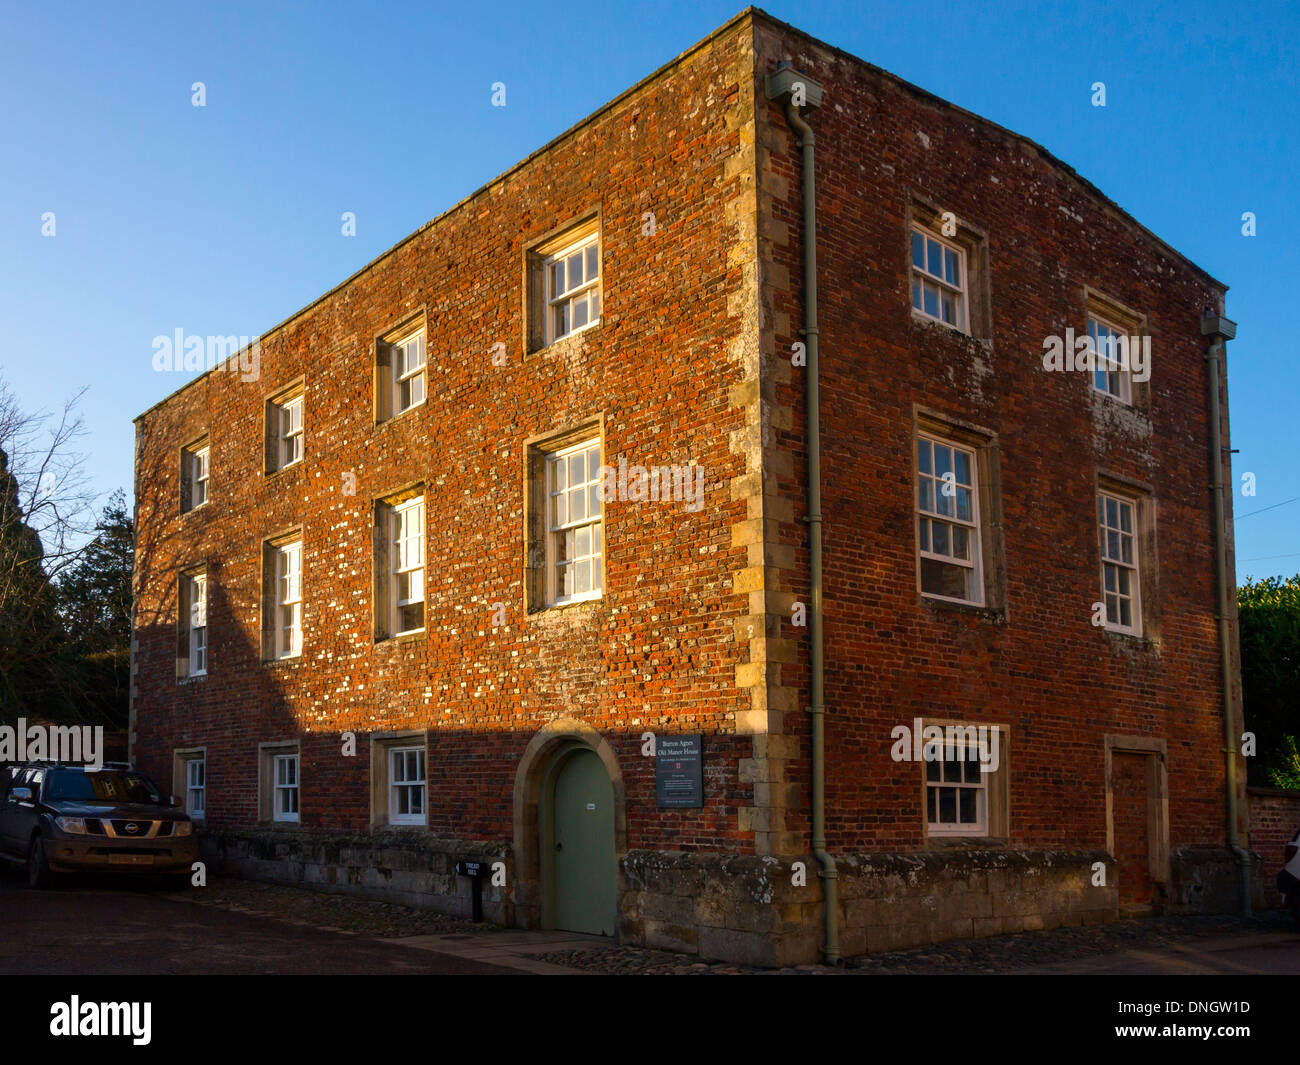 Medieval Burton Agnes Manor House exterior  built 15th Century exterior encased in brick during the 17th and 18th centuries. Stock Photo